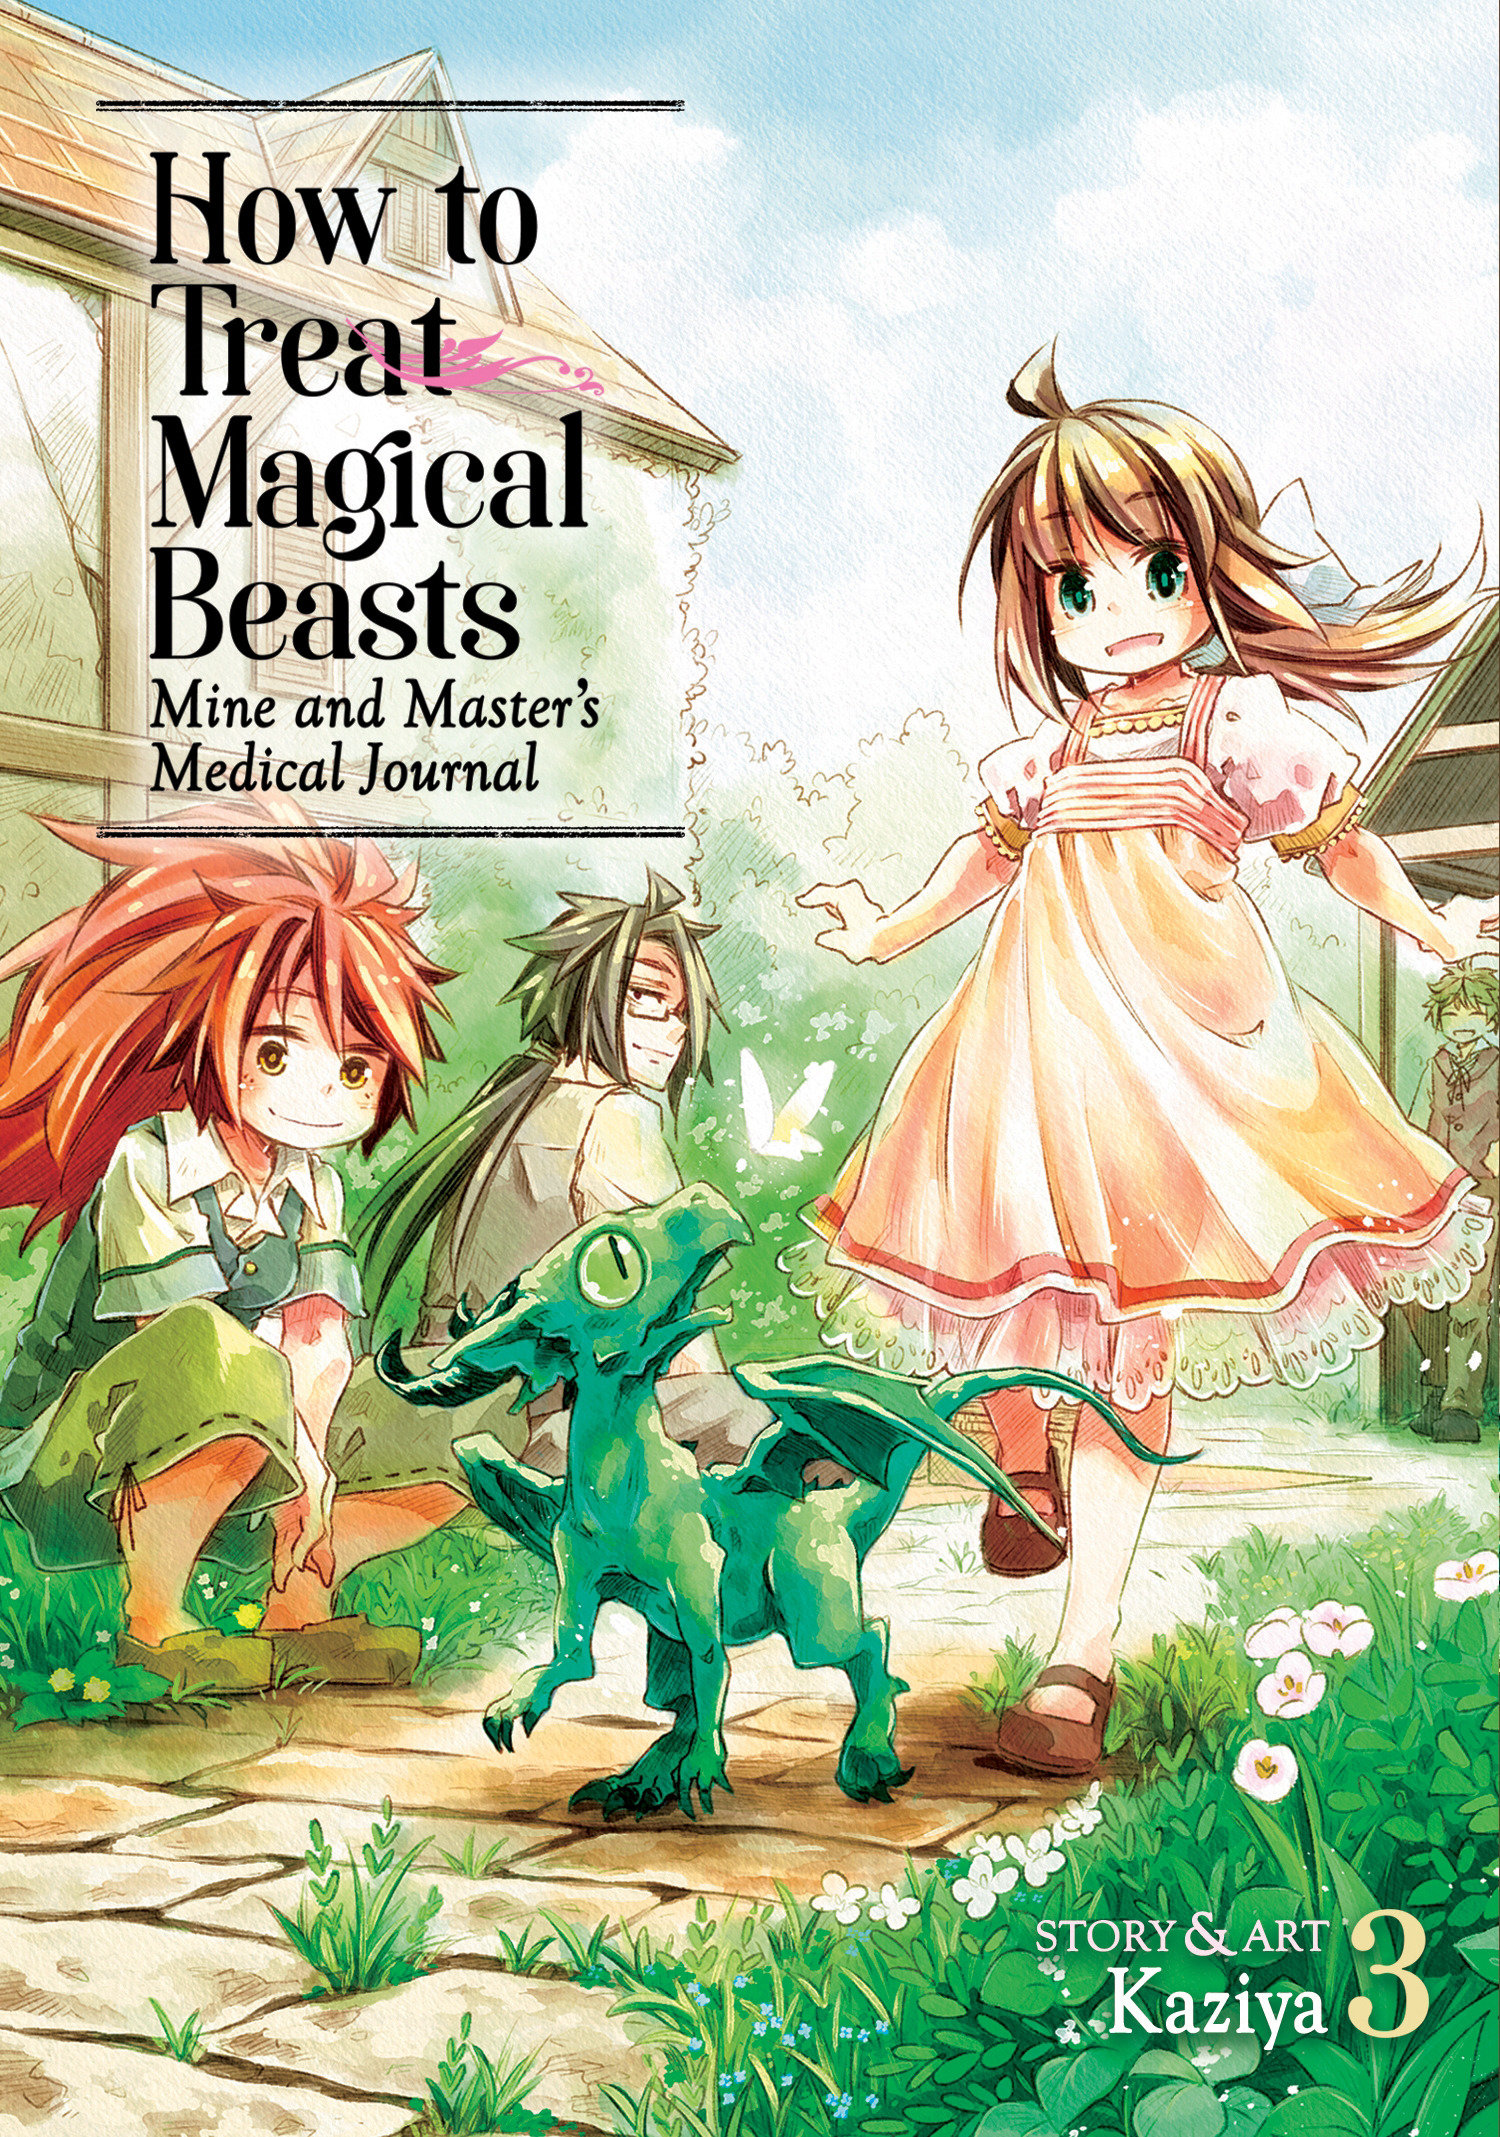 How to Treat Magical Beasts: Mine and Master's Medical Journal Vol. 3